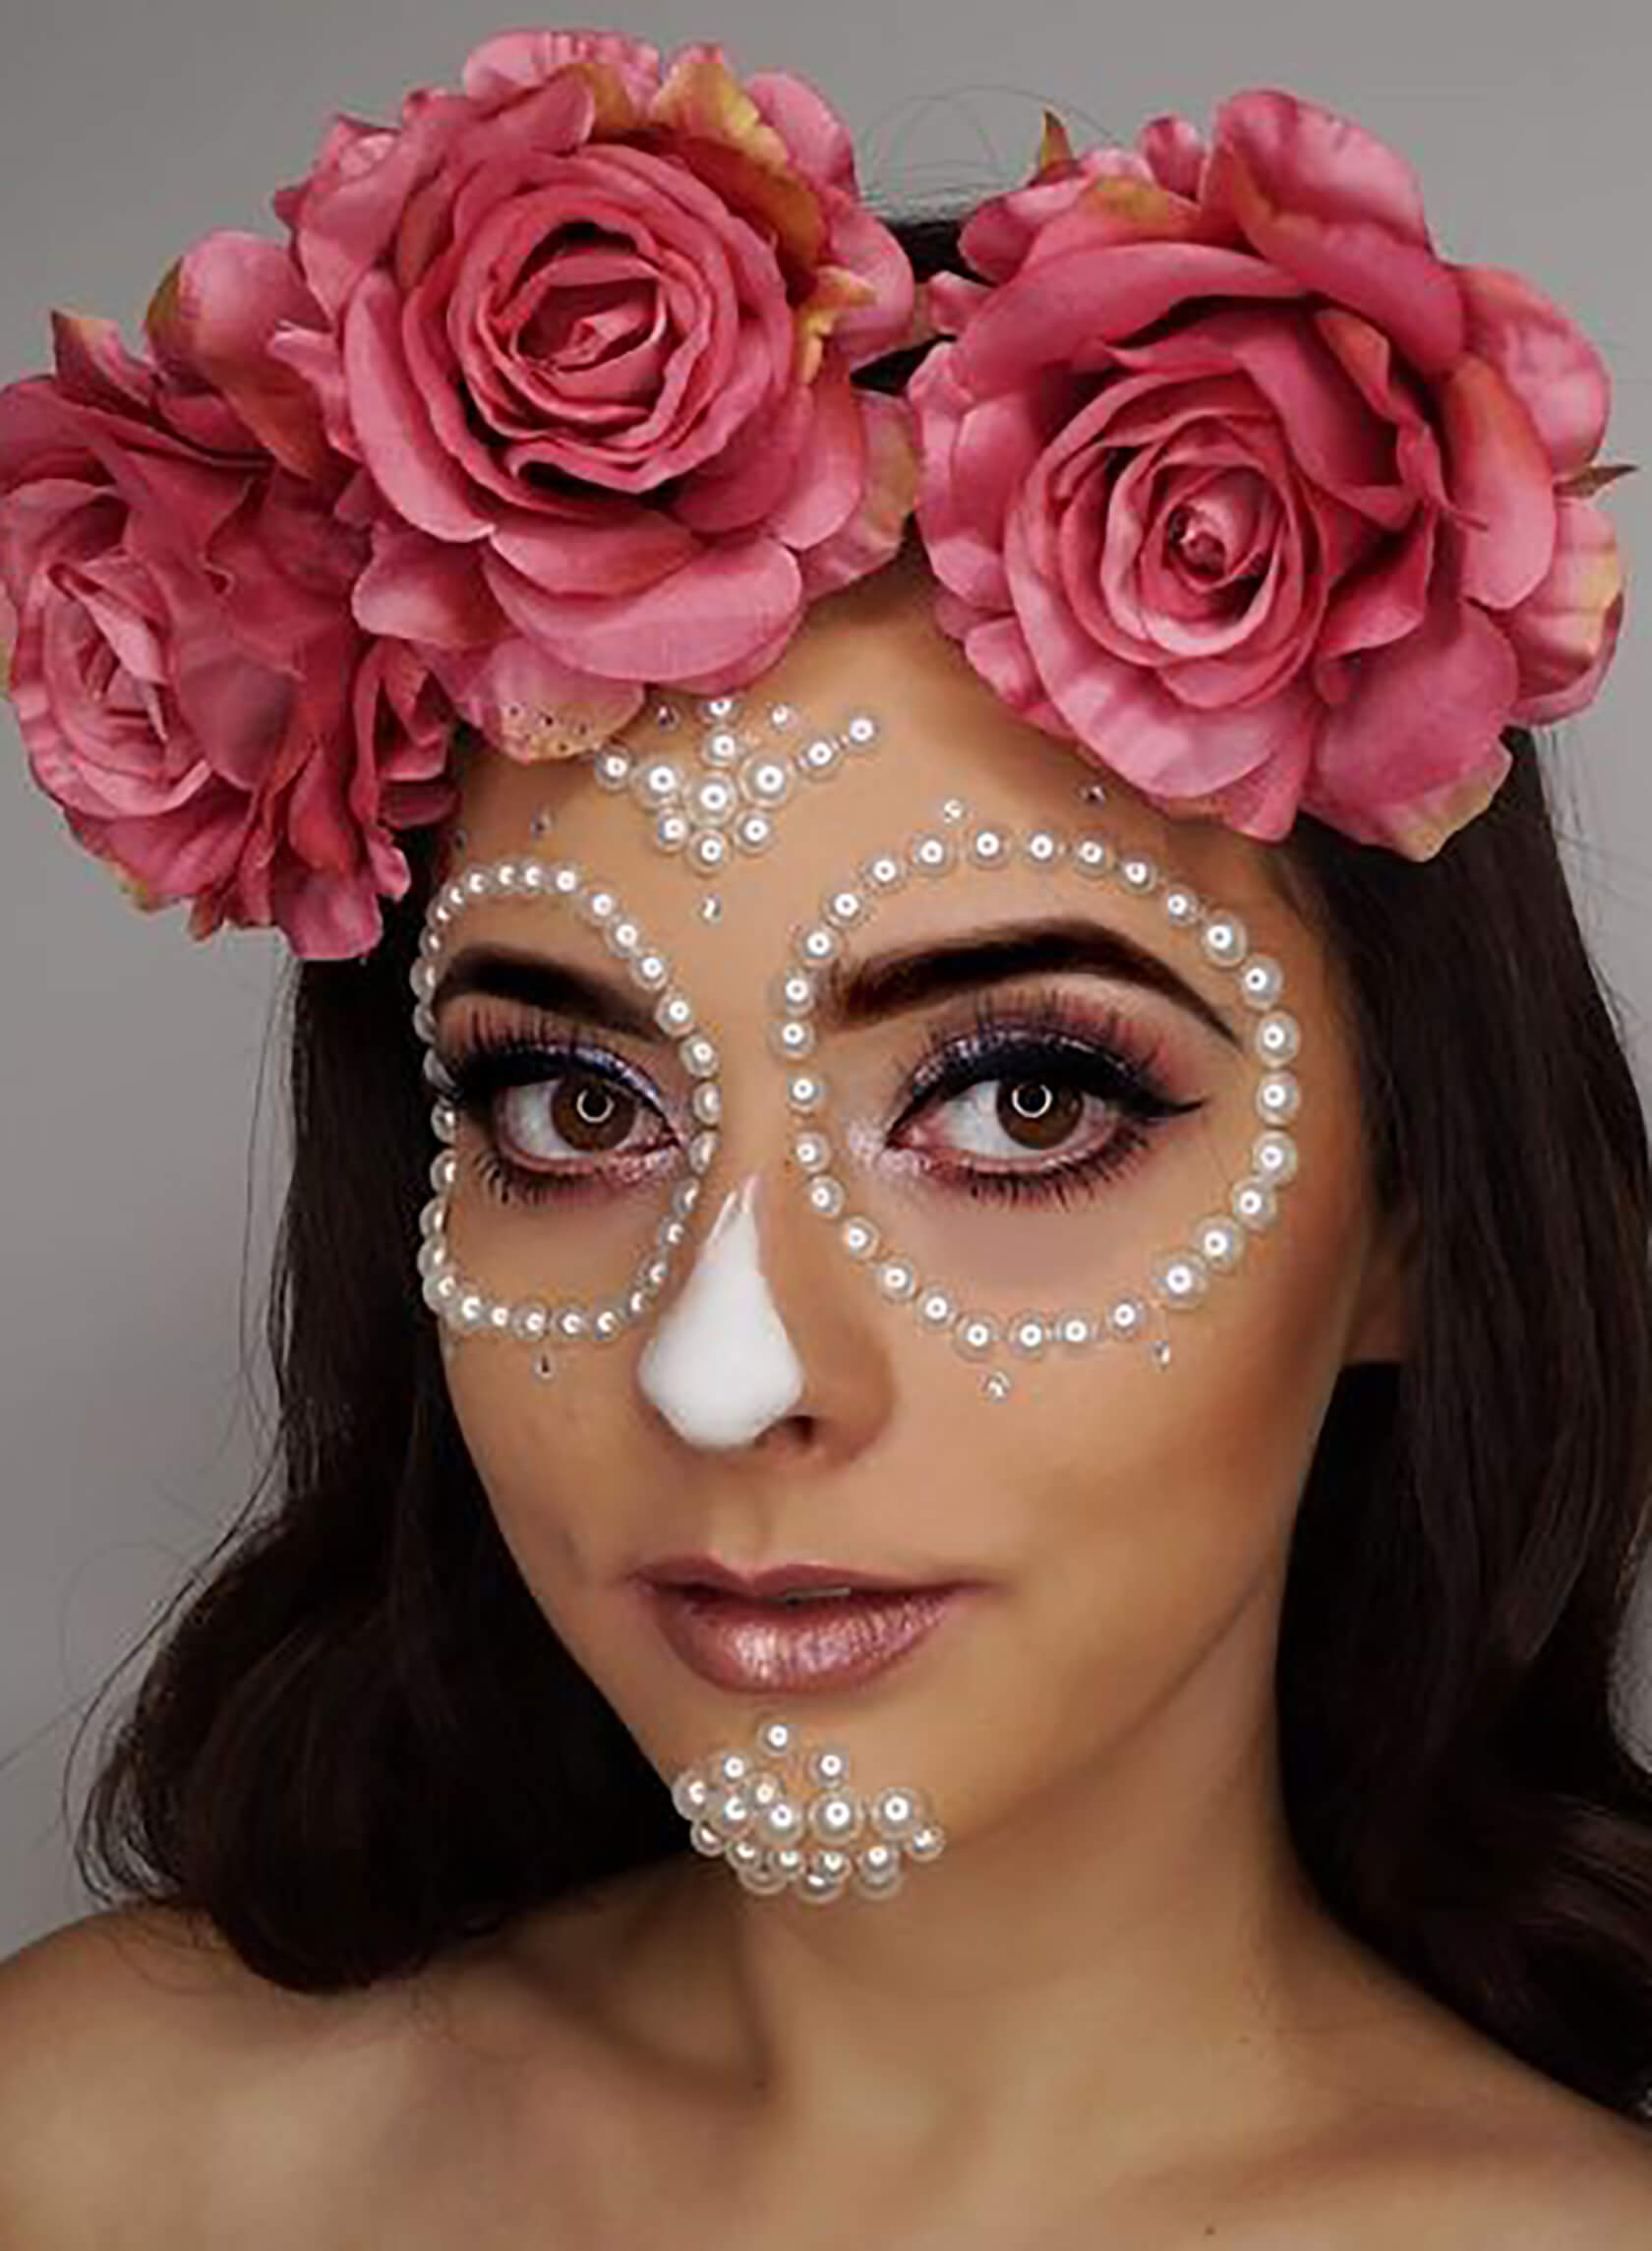 easy makeup for day of the dead